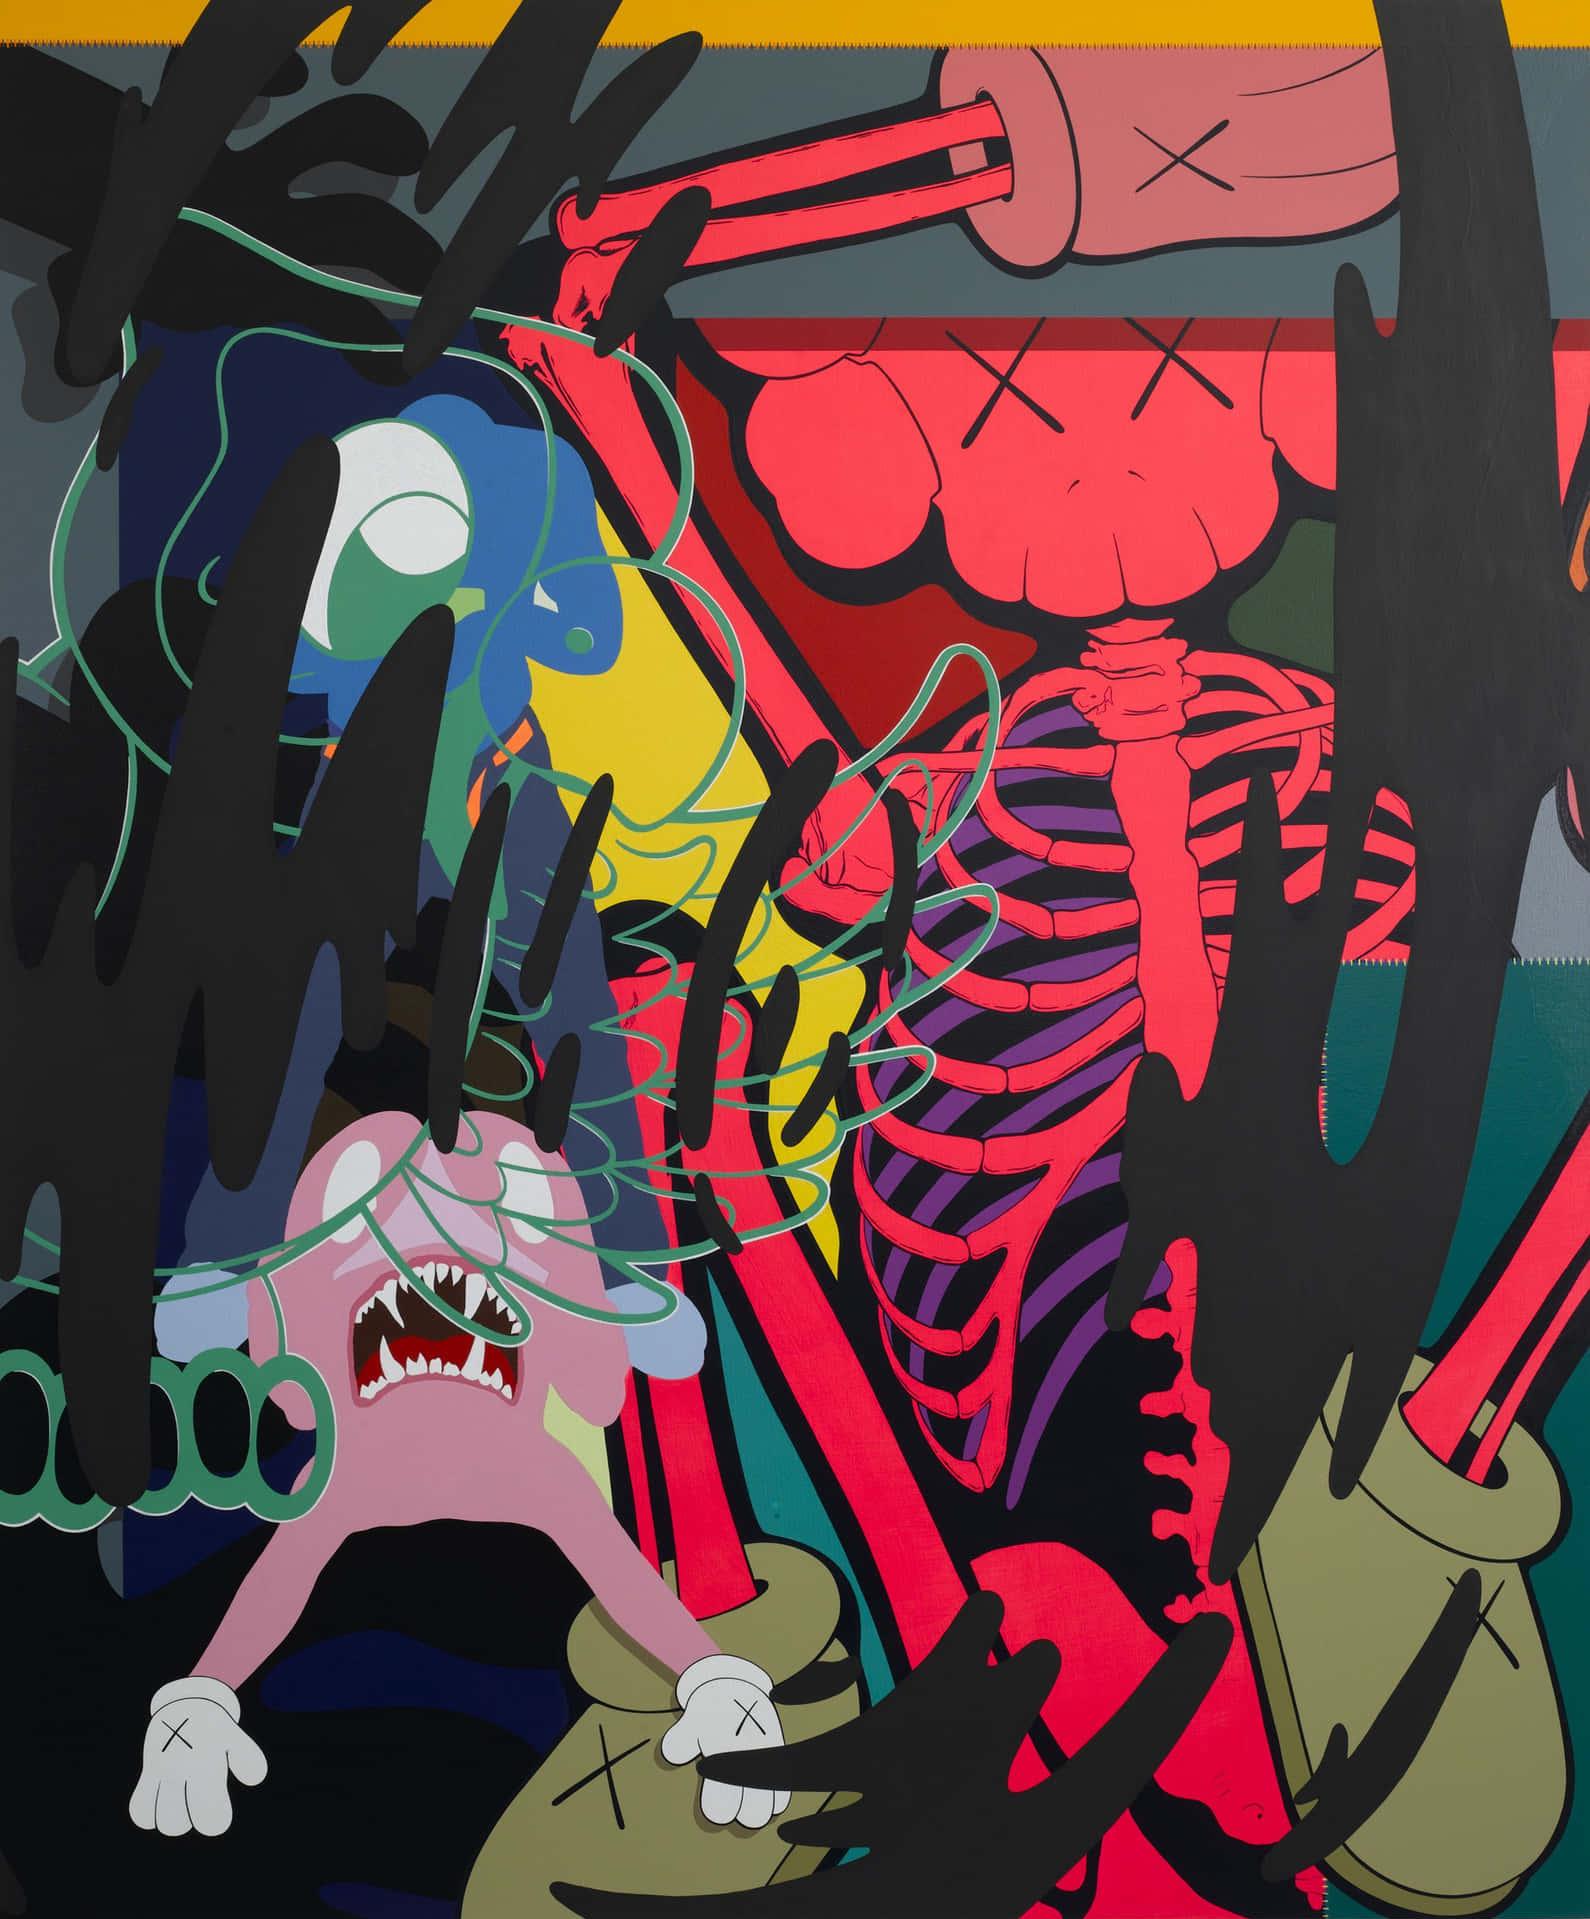 Download a painting with skeletons and other cartoon characters